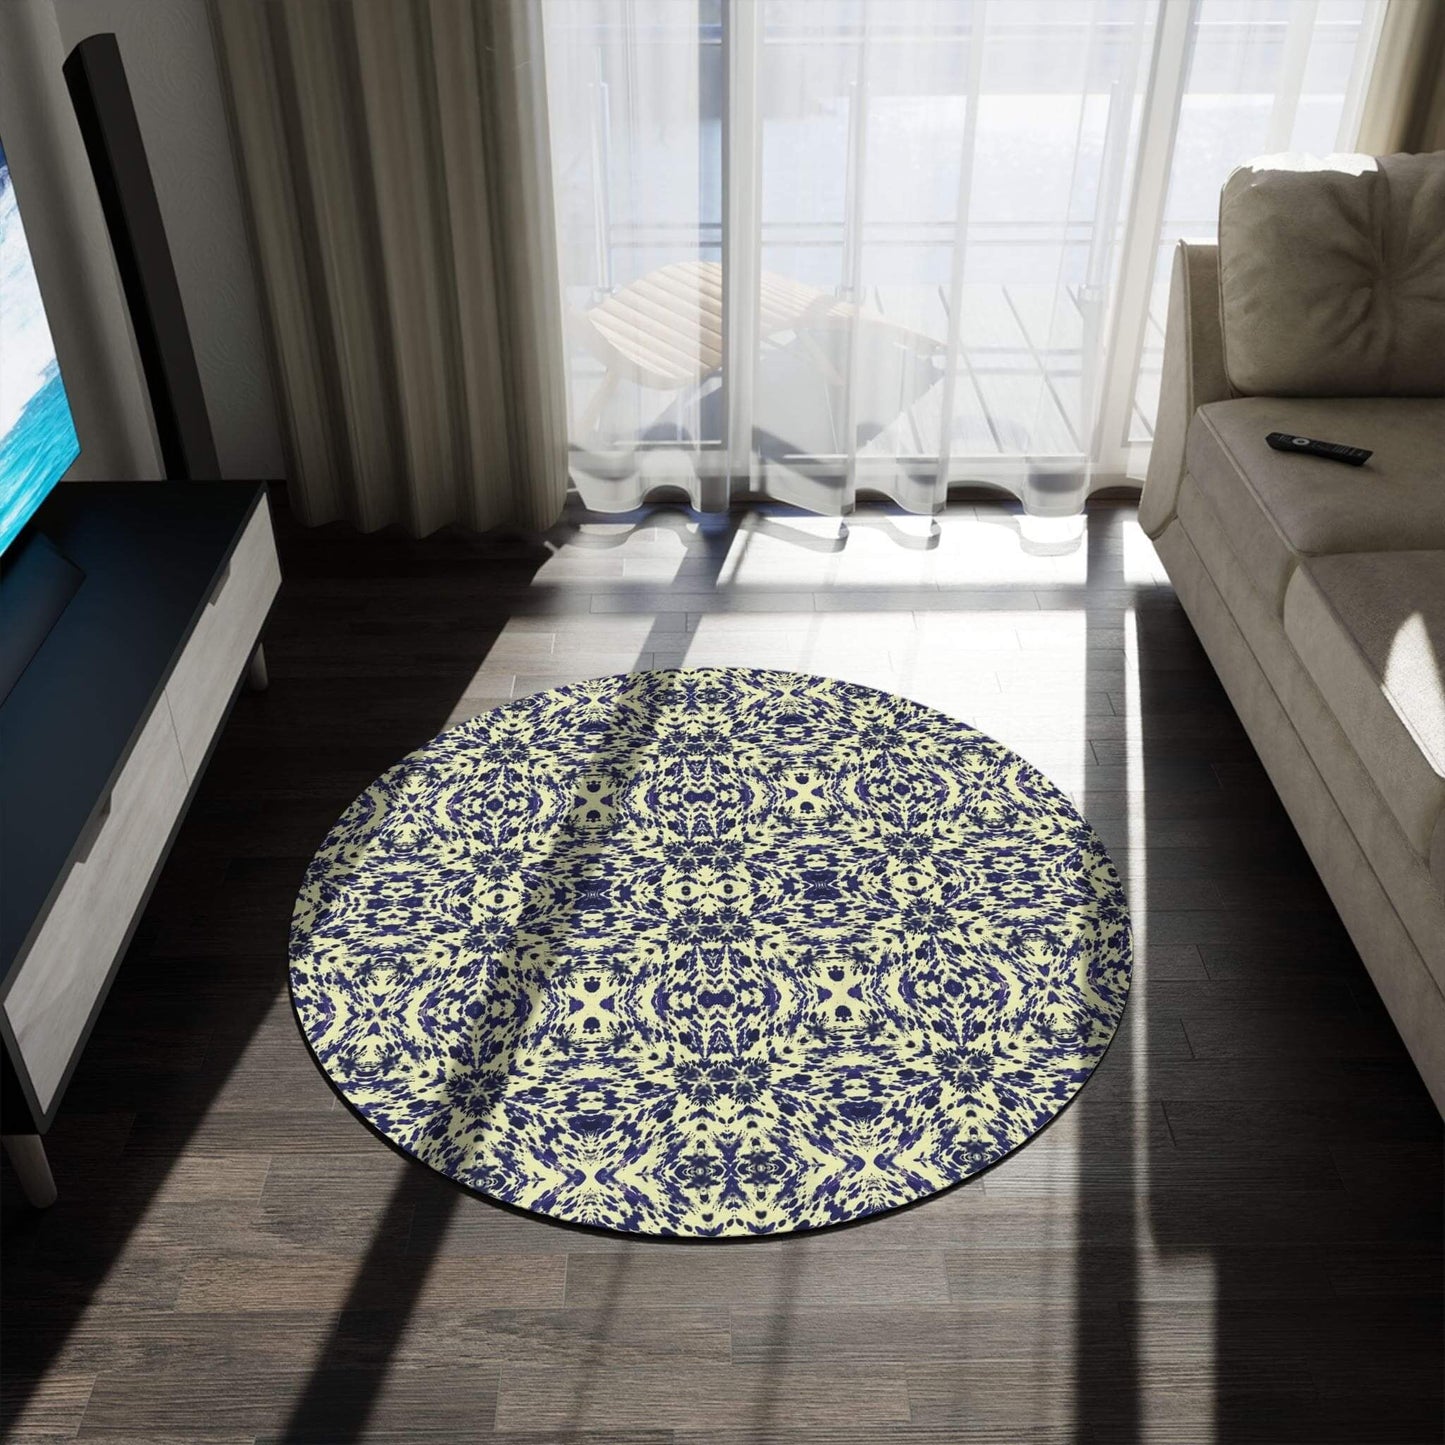 Rug for lounge room with abstract blue pattern by one owl artist